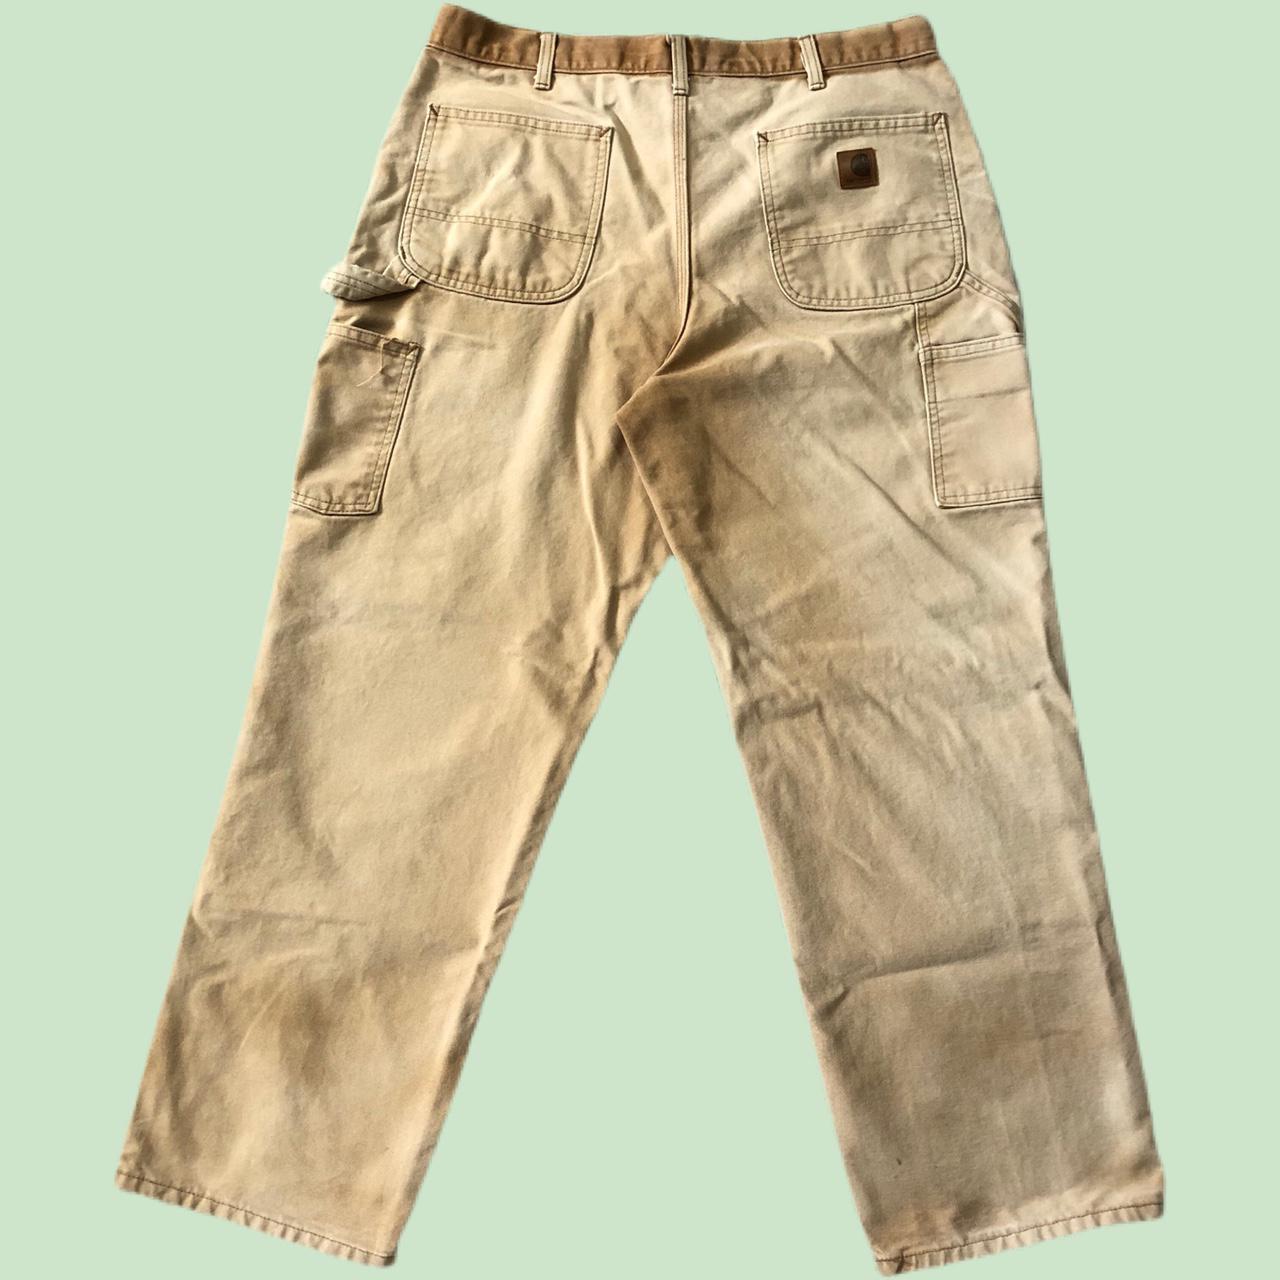 Product Image 3 - faded tan / beige carhartt